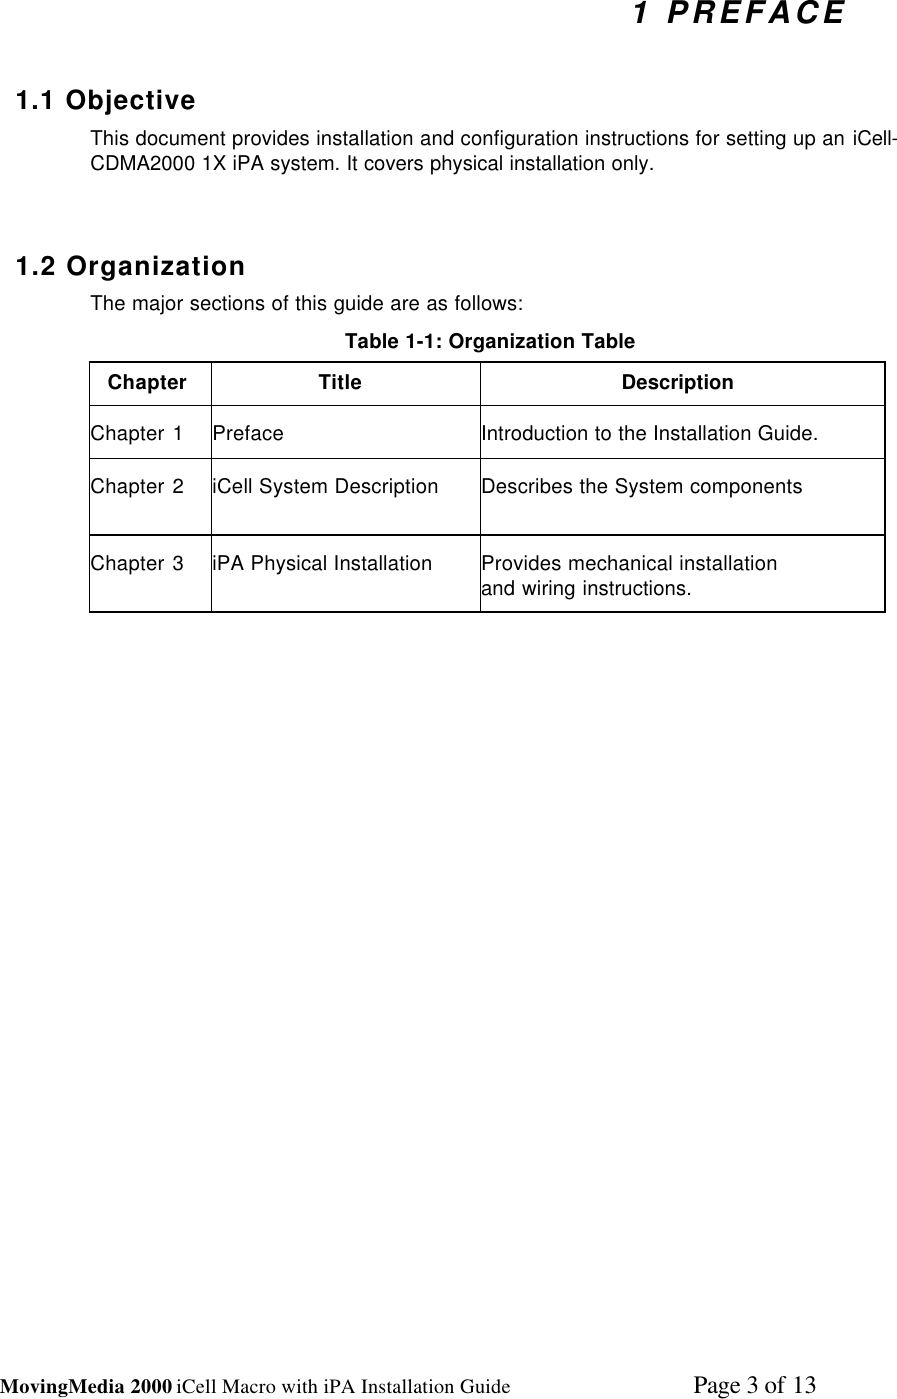 MovingMedia 2000 iCell Macro with iPA Installation Guide    Page 3 of 131 PREFACE1.1 ObjectiveThis document provides installation and configuration instructions for setting up an iCell-CDMA2000 1X iPA system. It covers physical installation only.1.2 OrganizationThe major sections of this guide are as follows:Table 1-1: Organization TableChapter Title DescriptionChapter 1 Preface Introduction to the Installation Guide.Chapter 2 iCell System Description Describes the System componentsChapter 3 iPA Physical Installation Provides mechanical installationand wiring instructions.